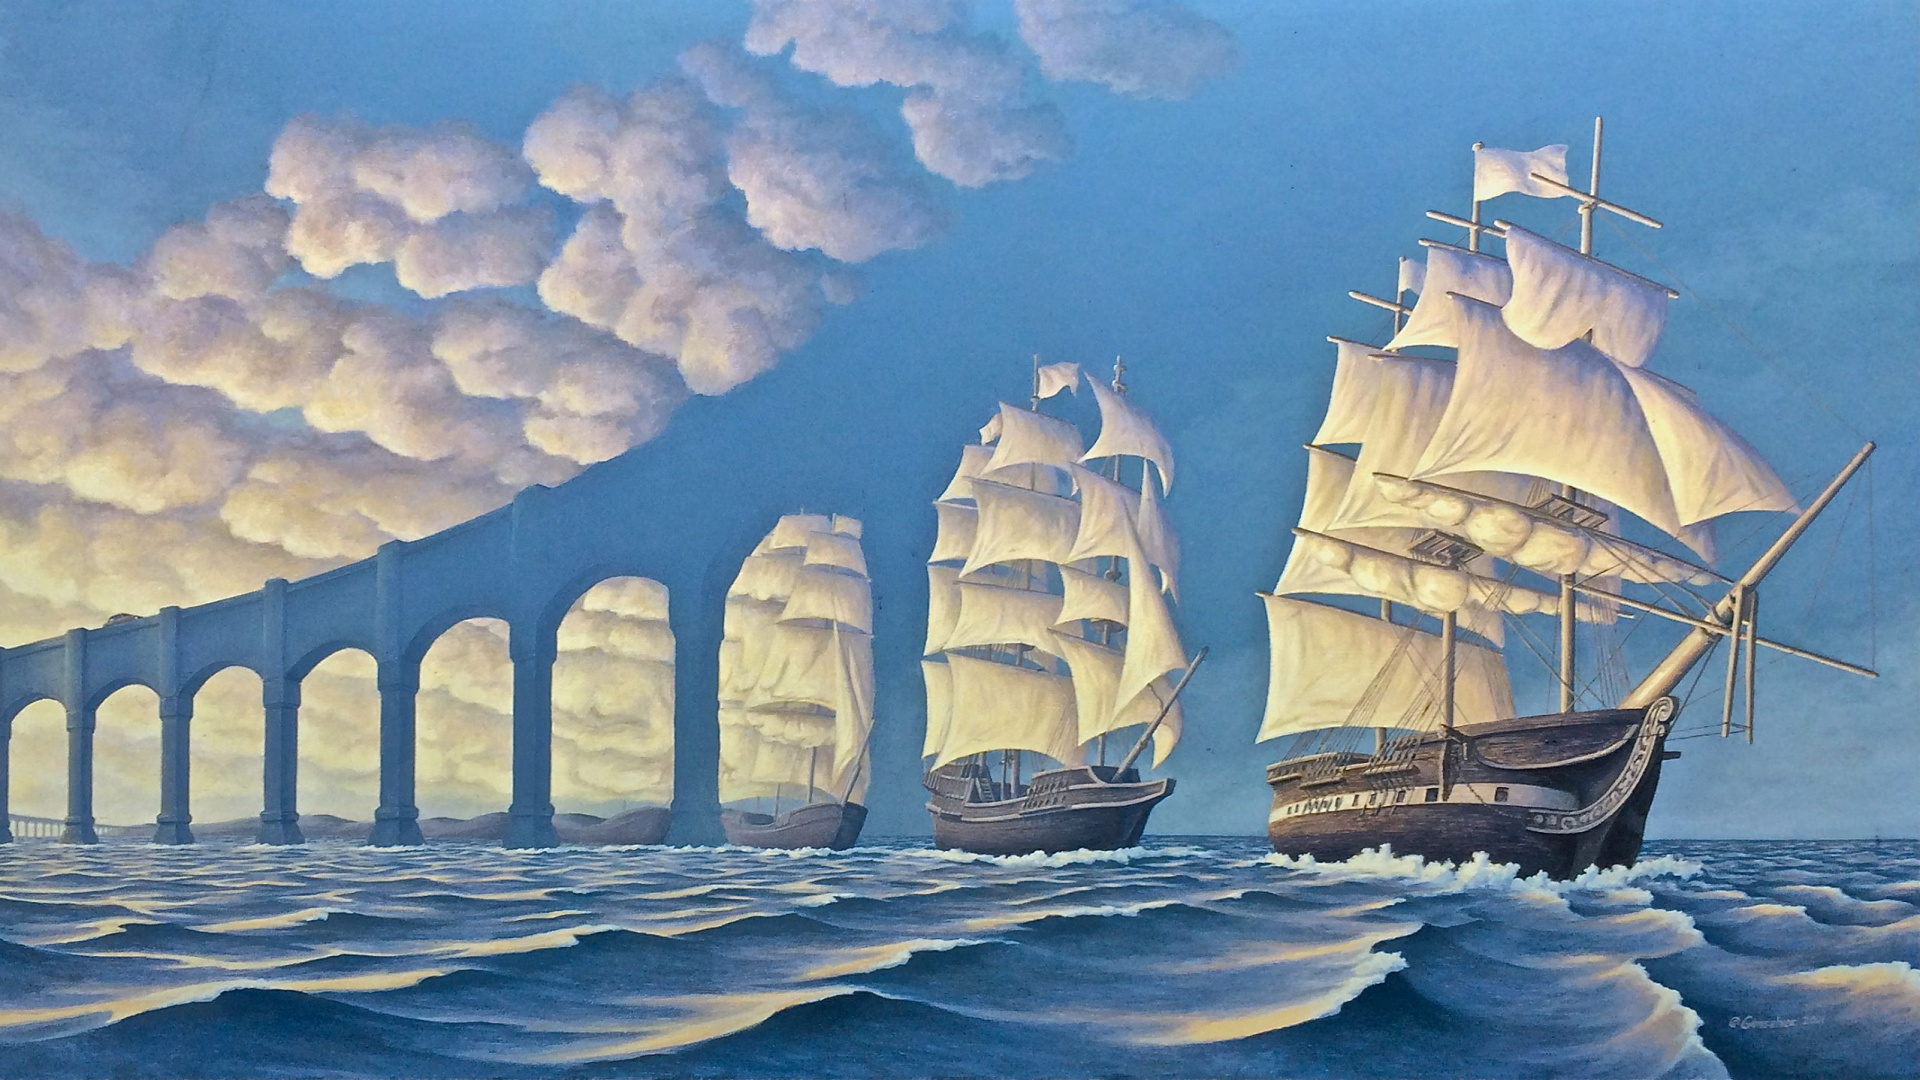 Surrealism, Painting, Art, Work of Art, Optical Illusion. Wallpaper in 1920x1080 Resolution